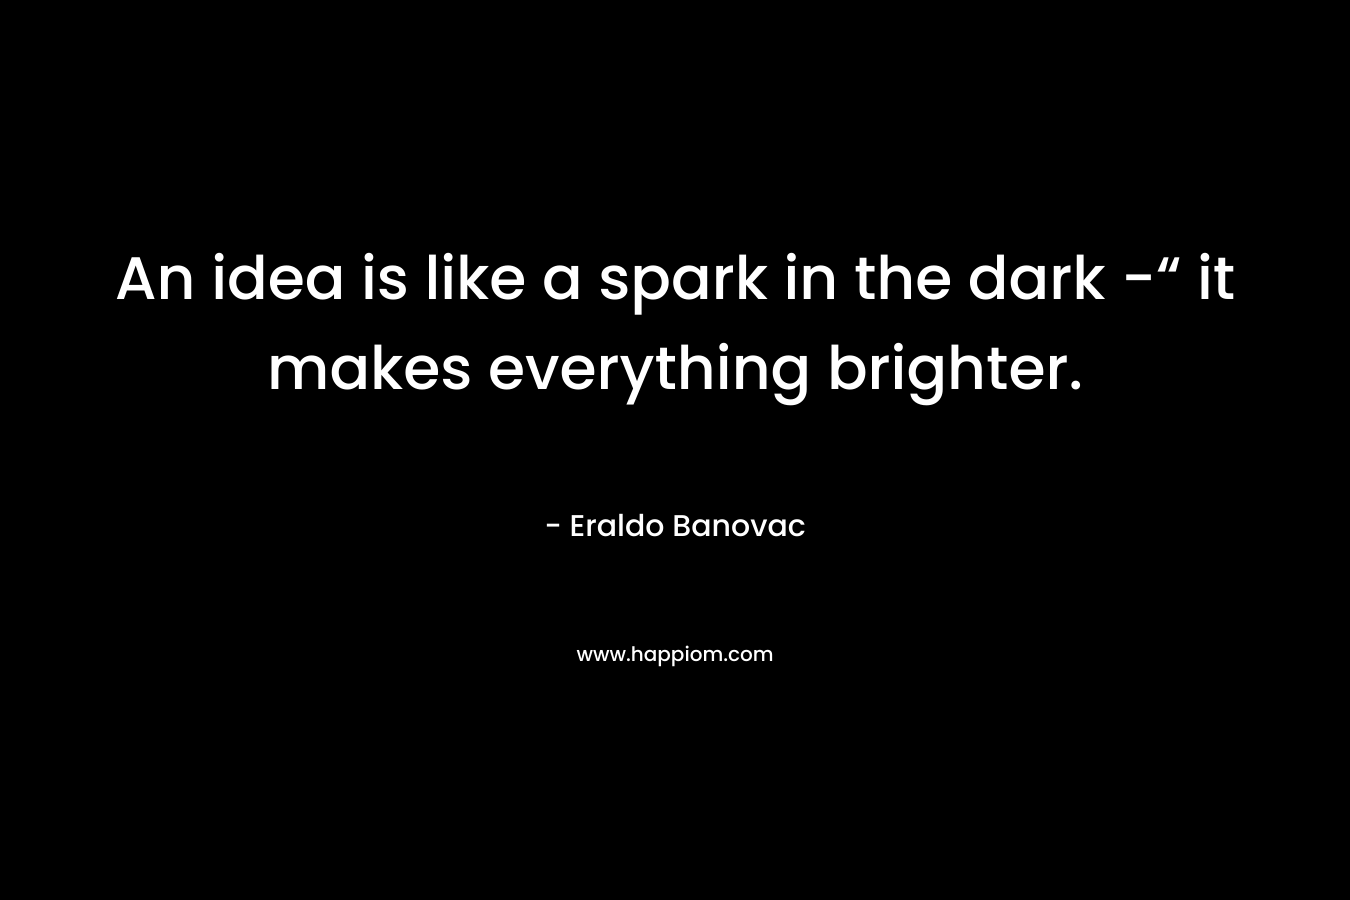 An idea is like a spark in the dark -“ it makes everything brighter.